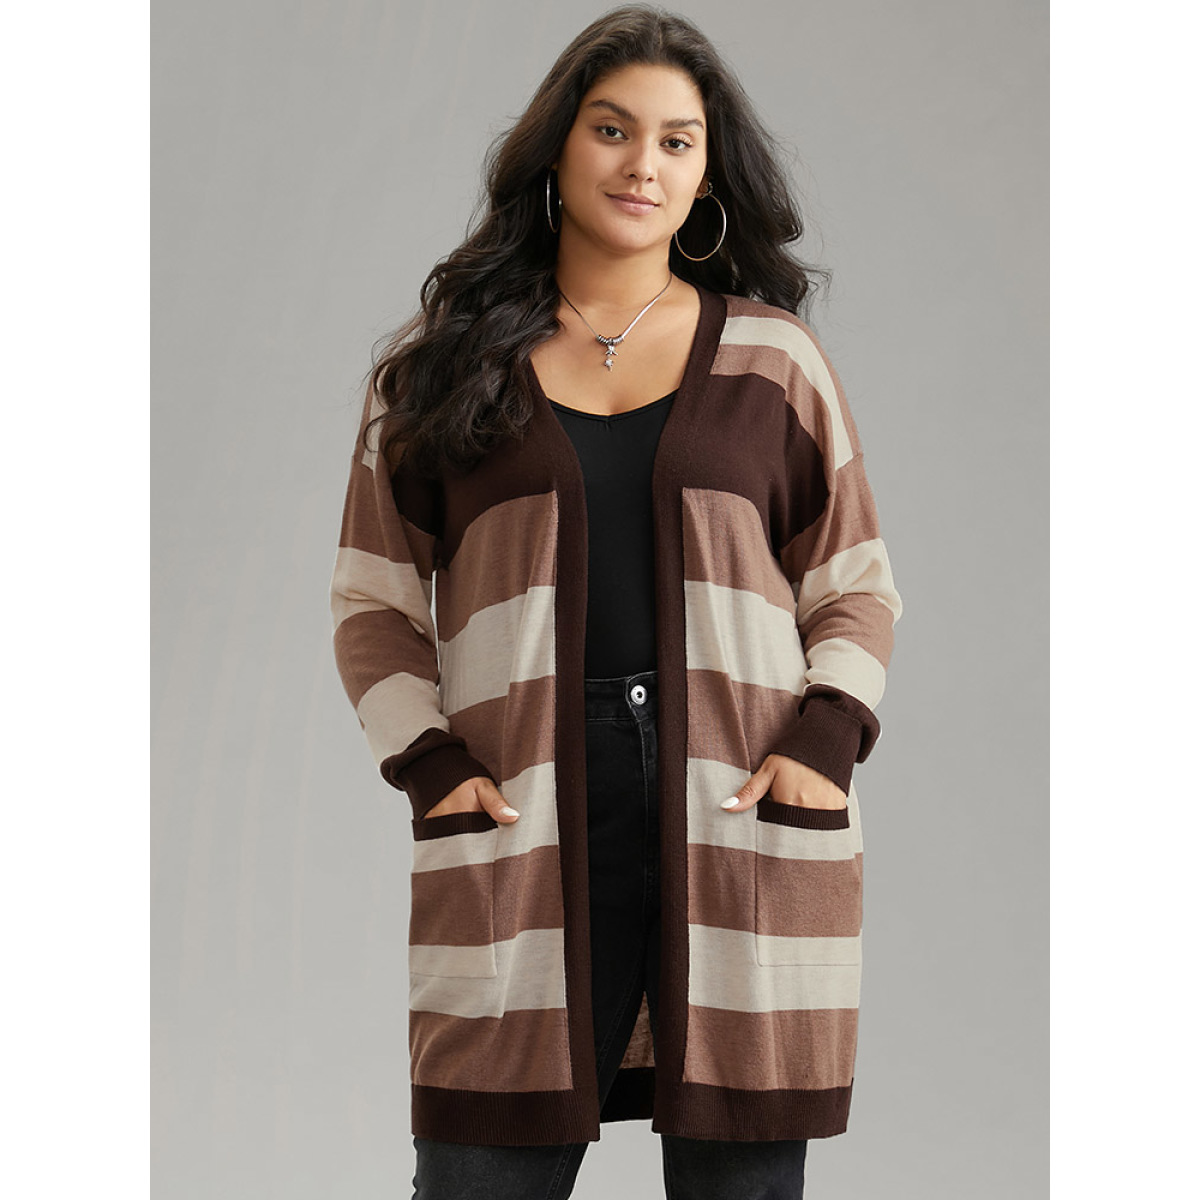 

Plus Size Supersoft Essentials Colorblock Contrast Pocket Cardigan DarkBrown Women Casual Loose Long Sleeve Dailywear Cardigans BloomChic